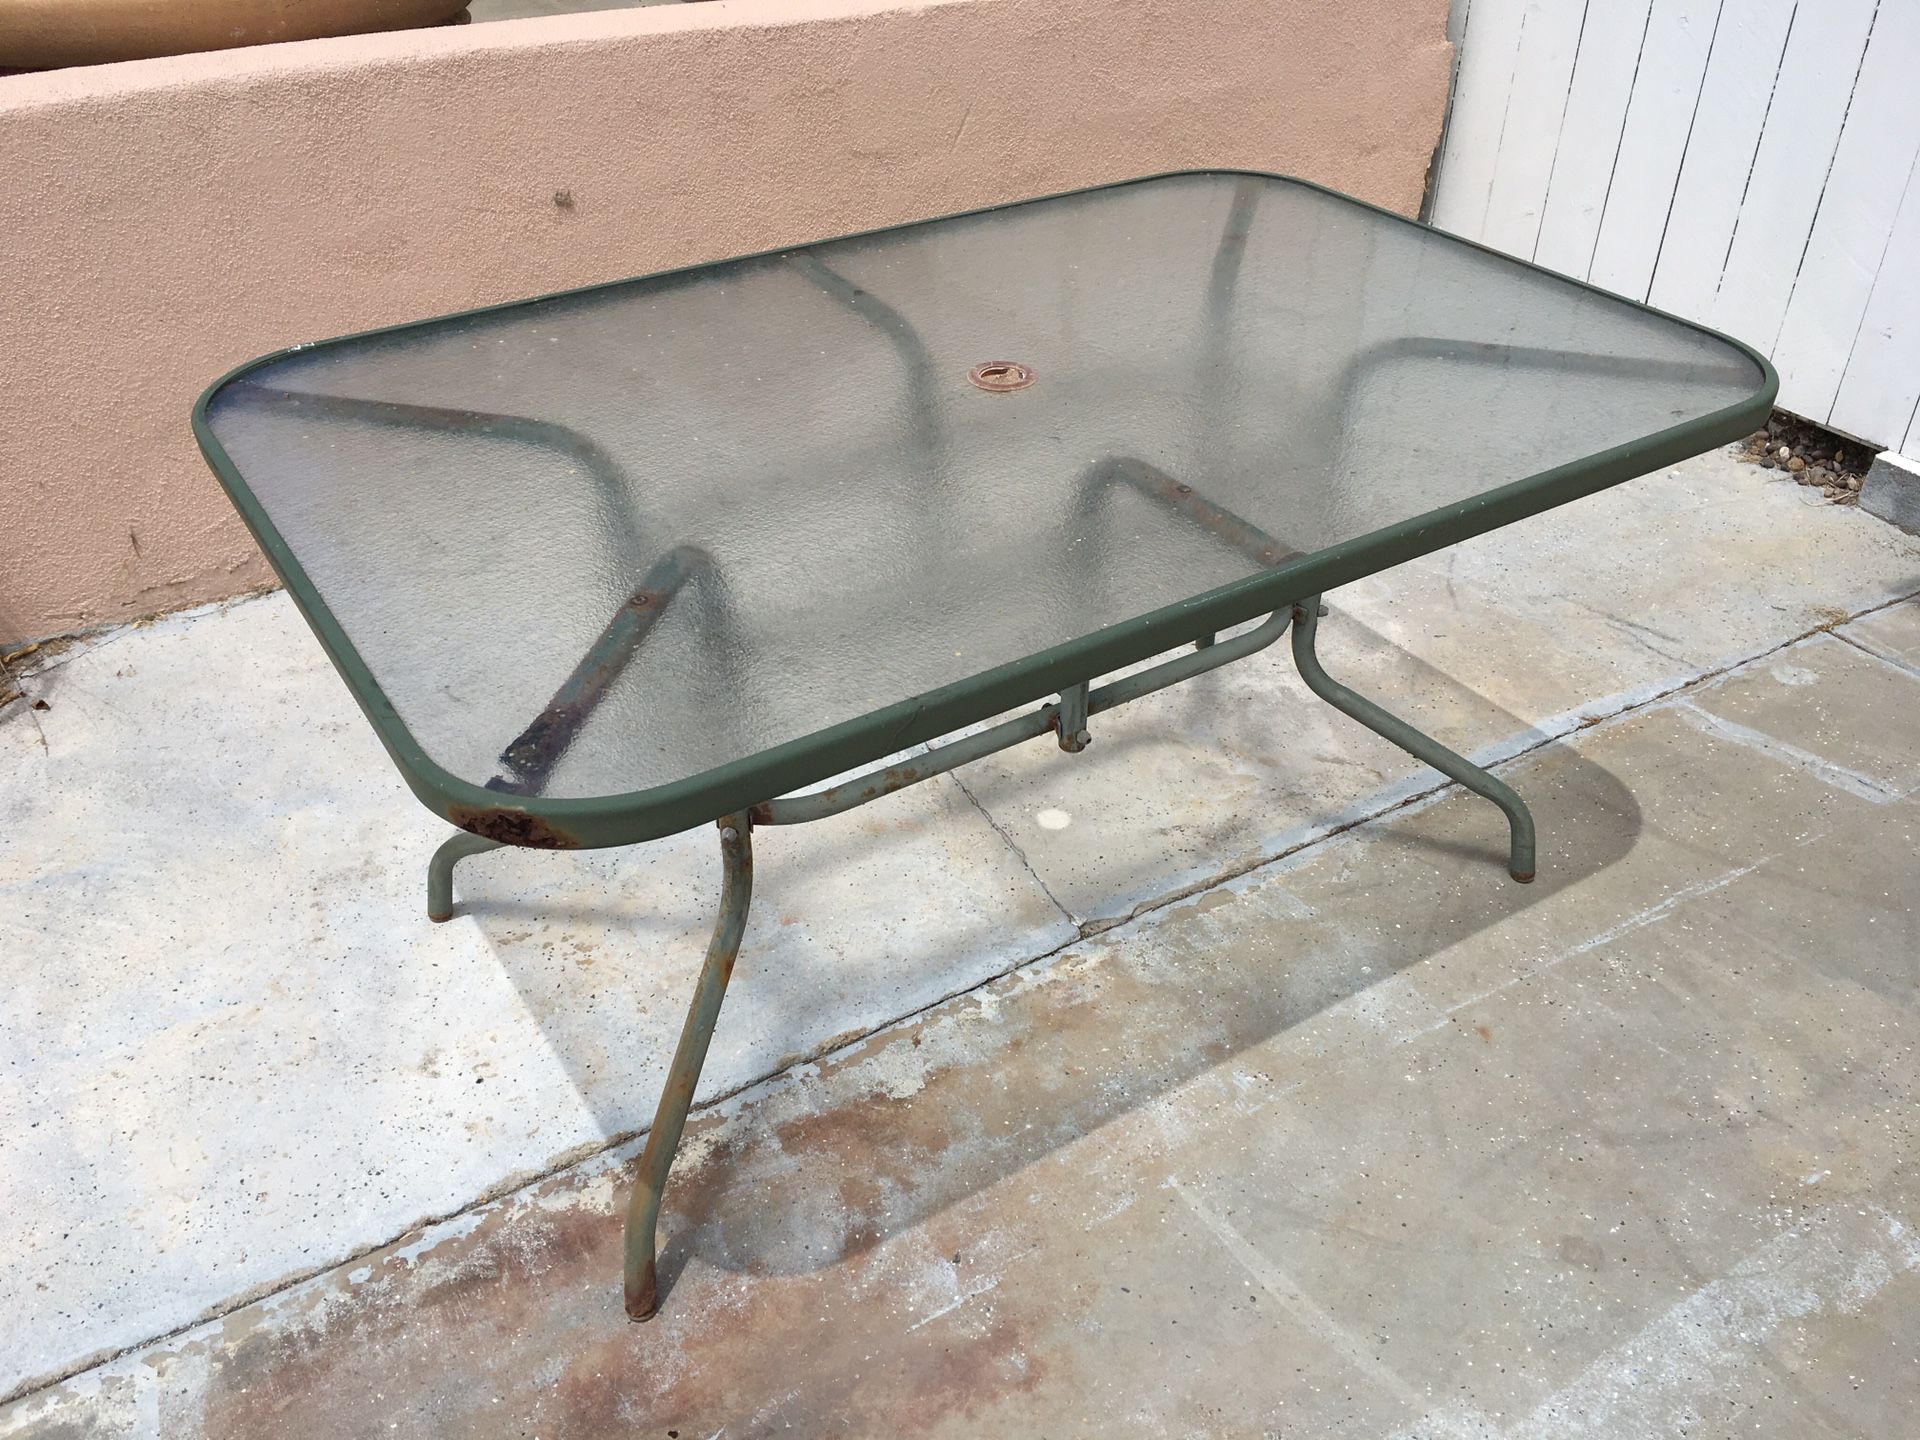 Patio table or picnic table